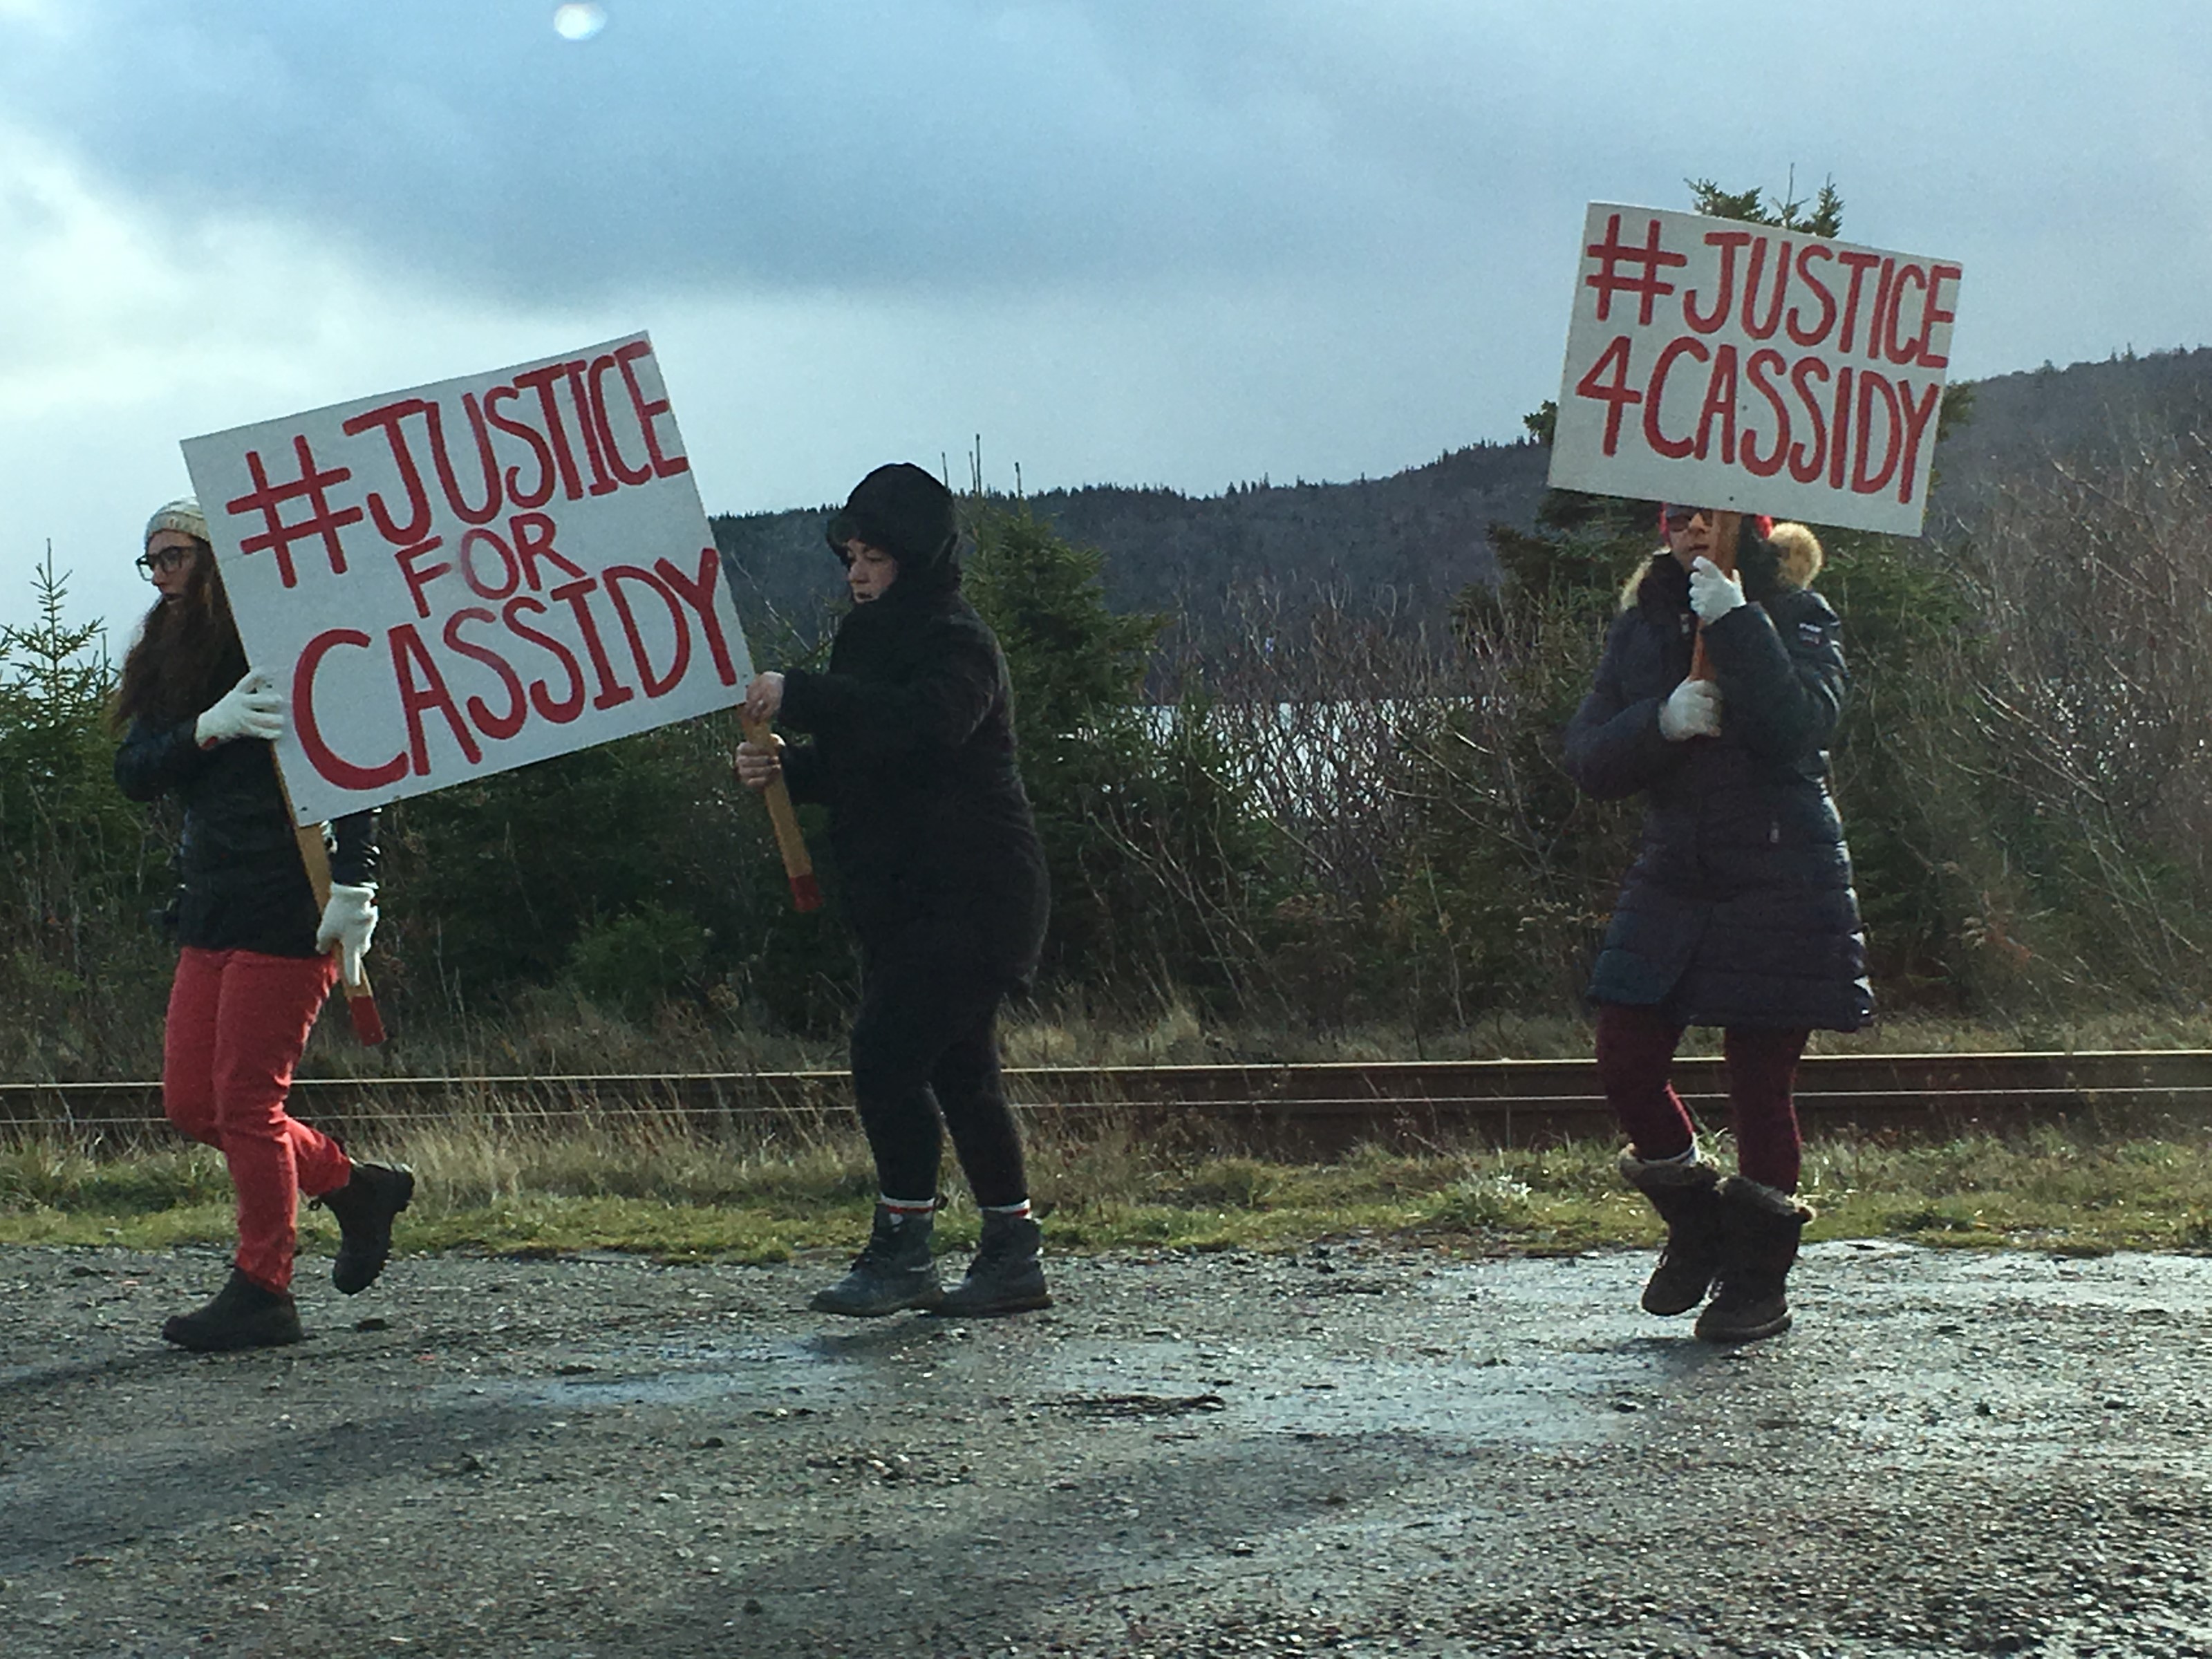 Justice for cassidy